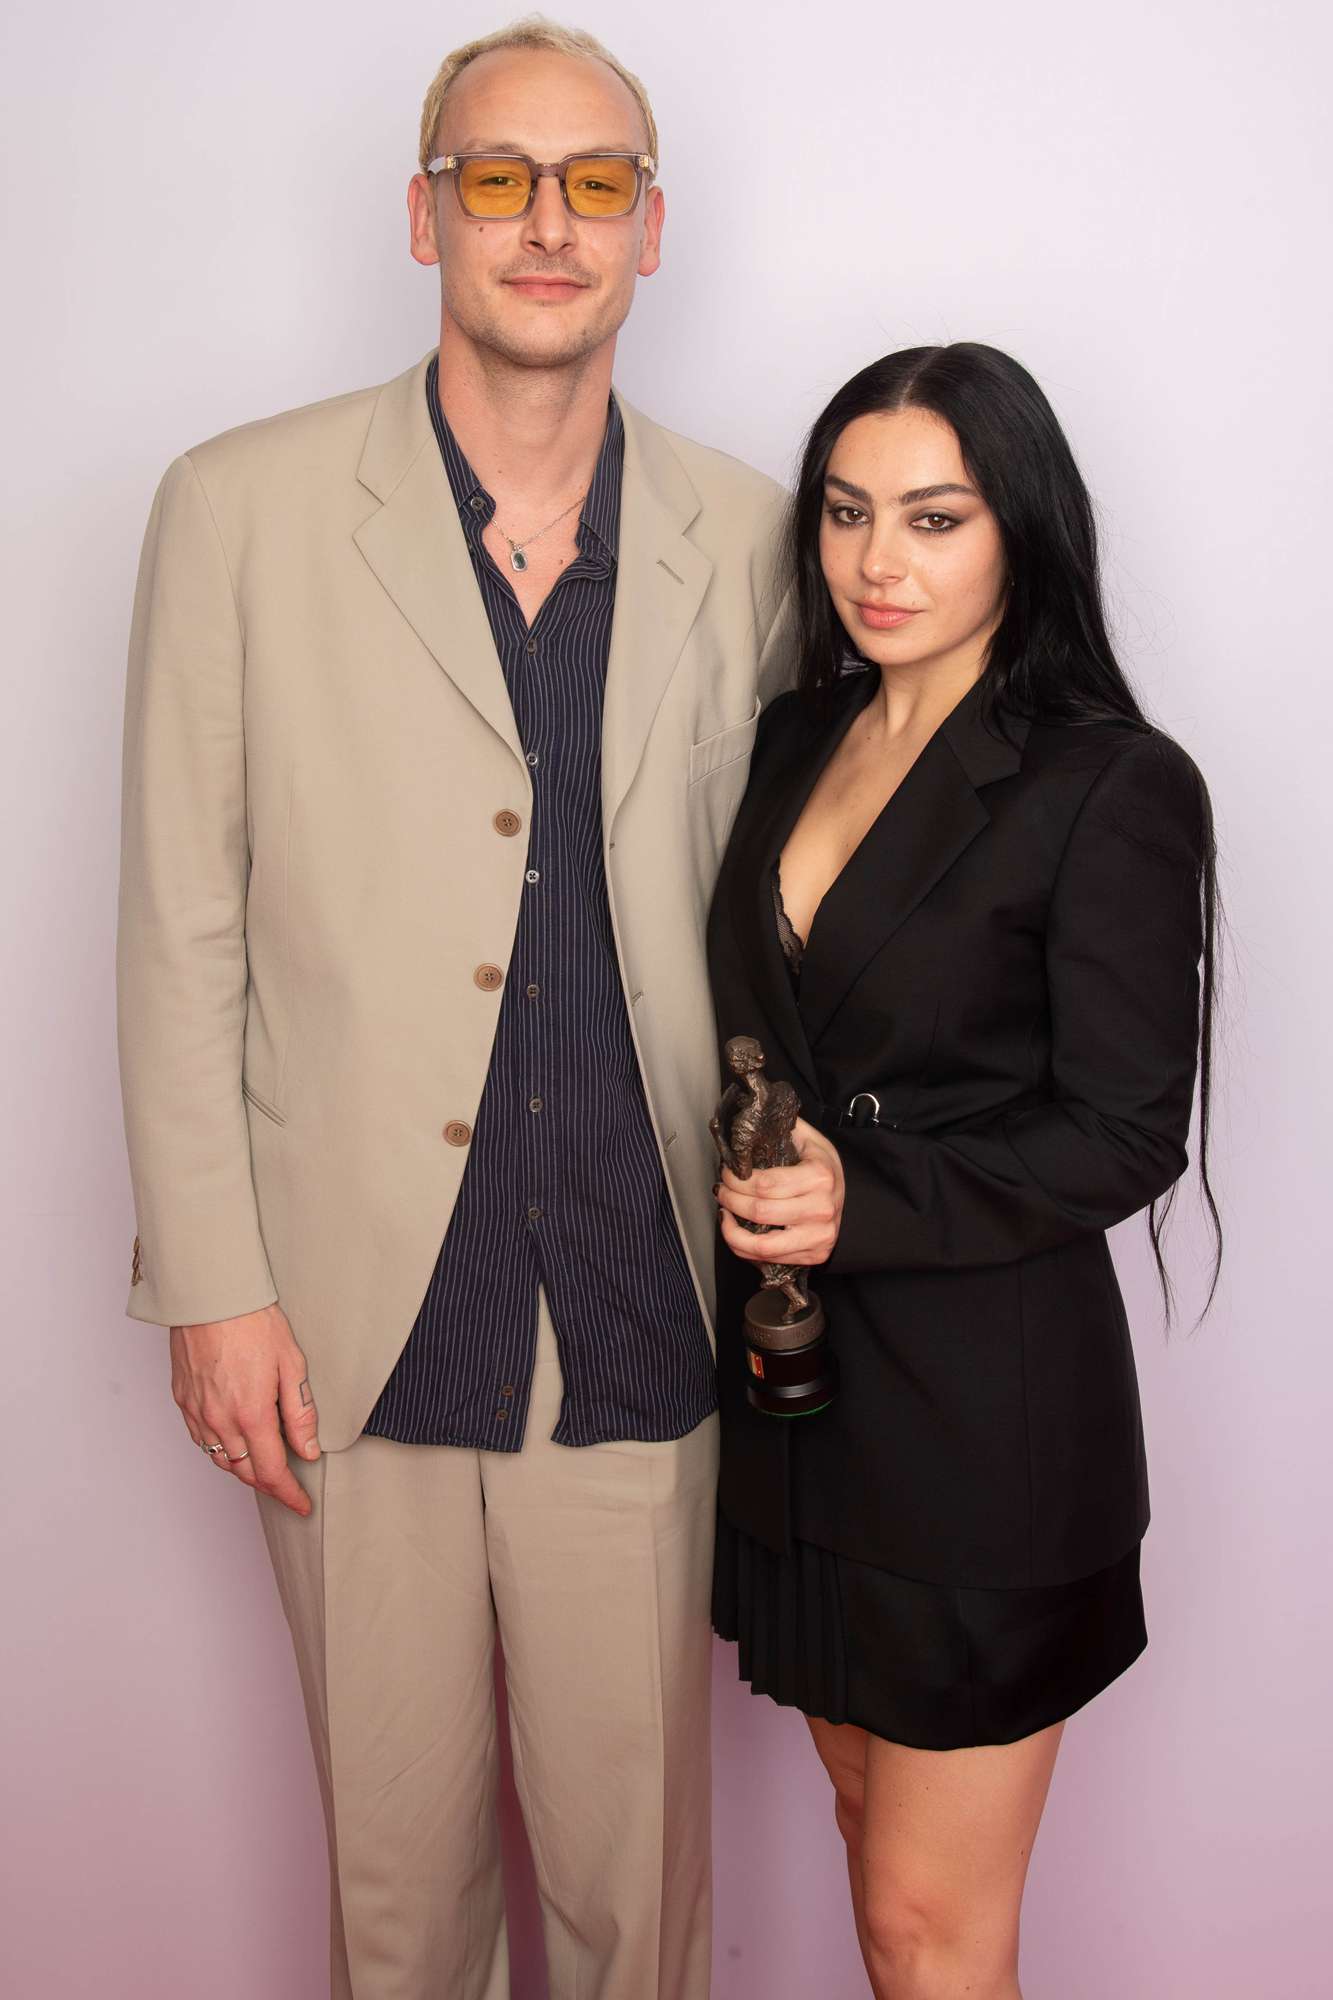 Charli XCX Jokes She's 'Such a Bitch' to Fiancé George Daniel When They Work Together Because They're 'So Close'